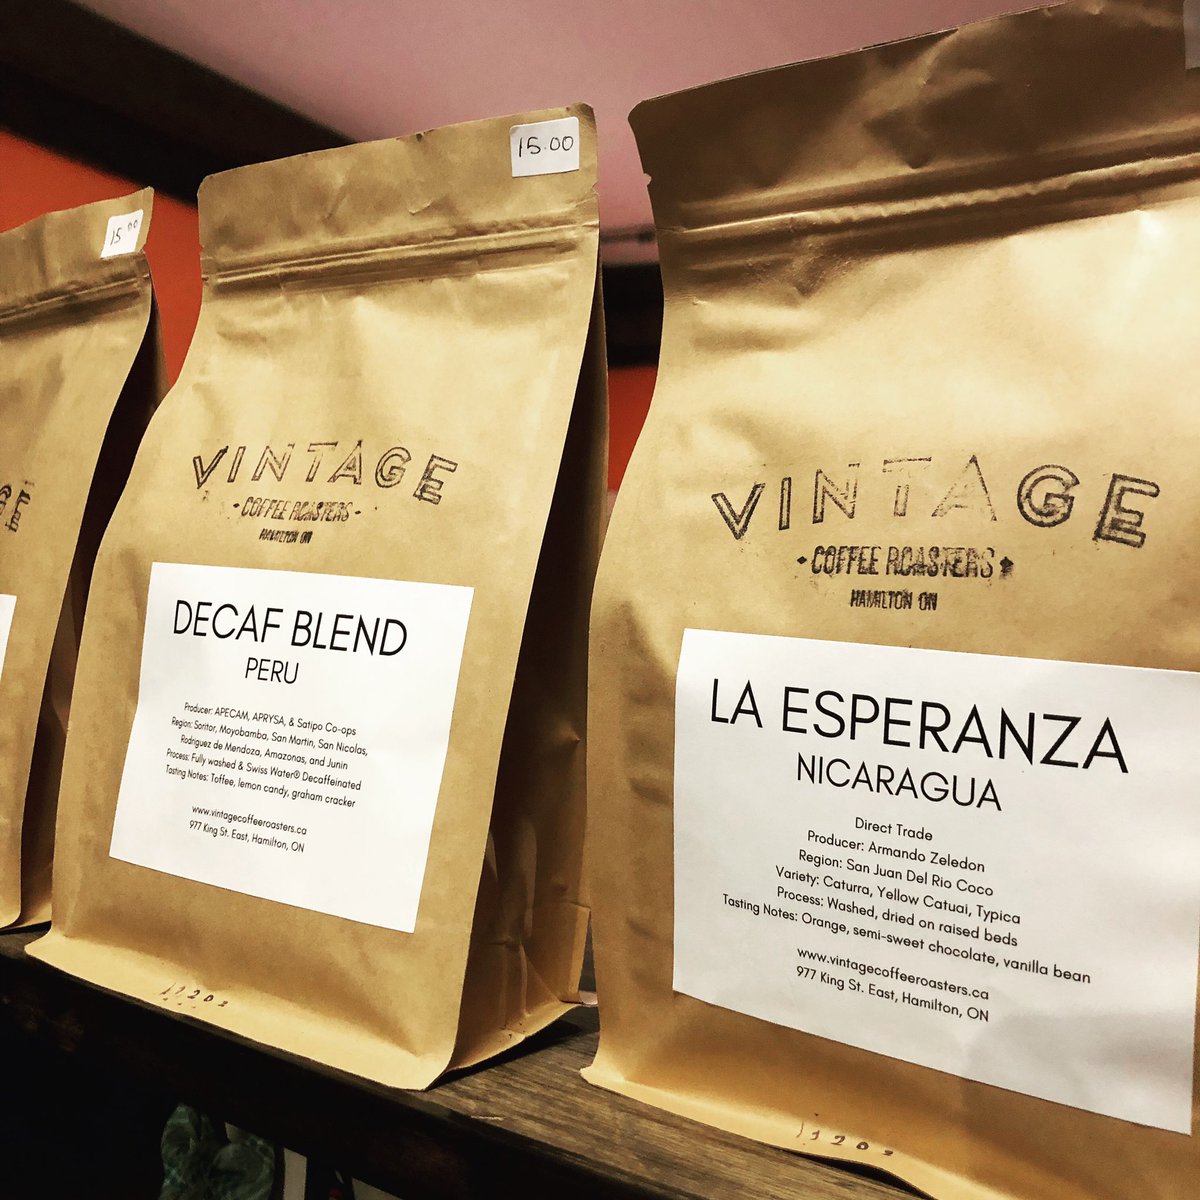 We get a lot of compliments on our great coffee, so we decided to carry it by the bag!  Come into the #dogcafe and get your own delicious bag of #coffee. My Dog’s Cafe is open today 11-5 pm.  #HamOnt #vintagecoffee #dogfriendlycafe #LockeStreet